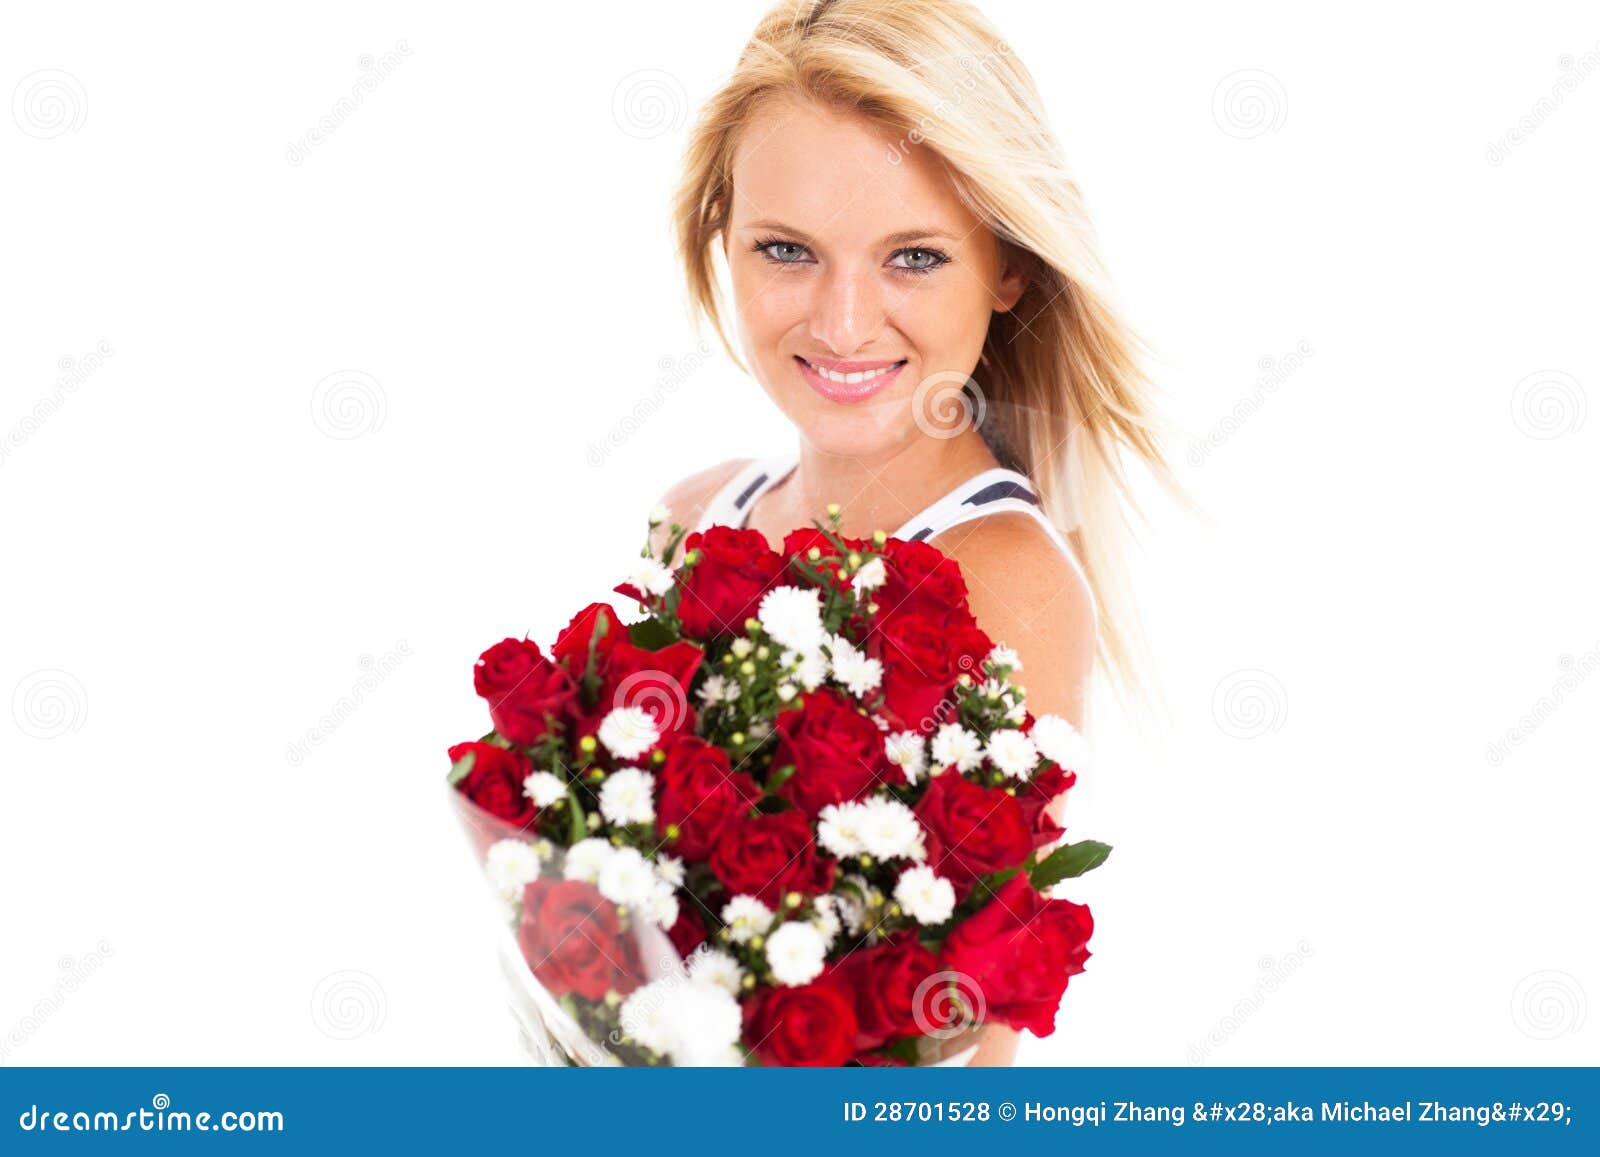 woman holding roses 28701528